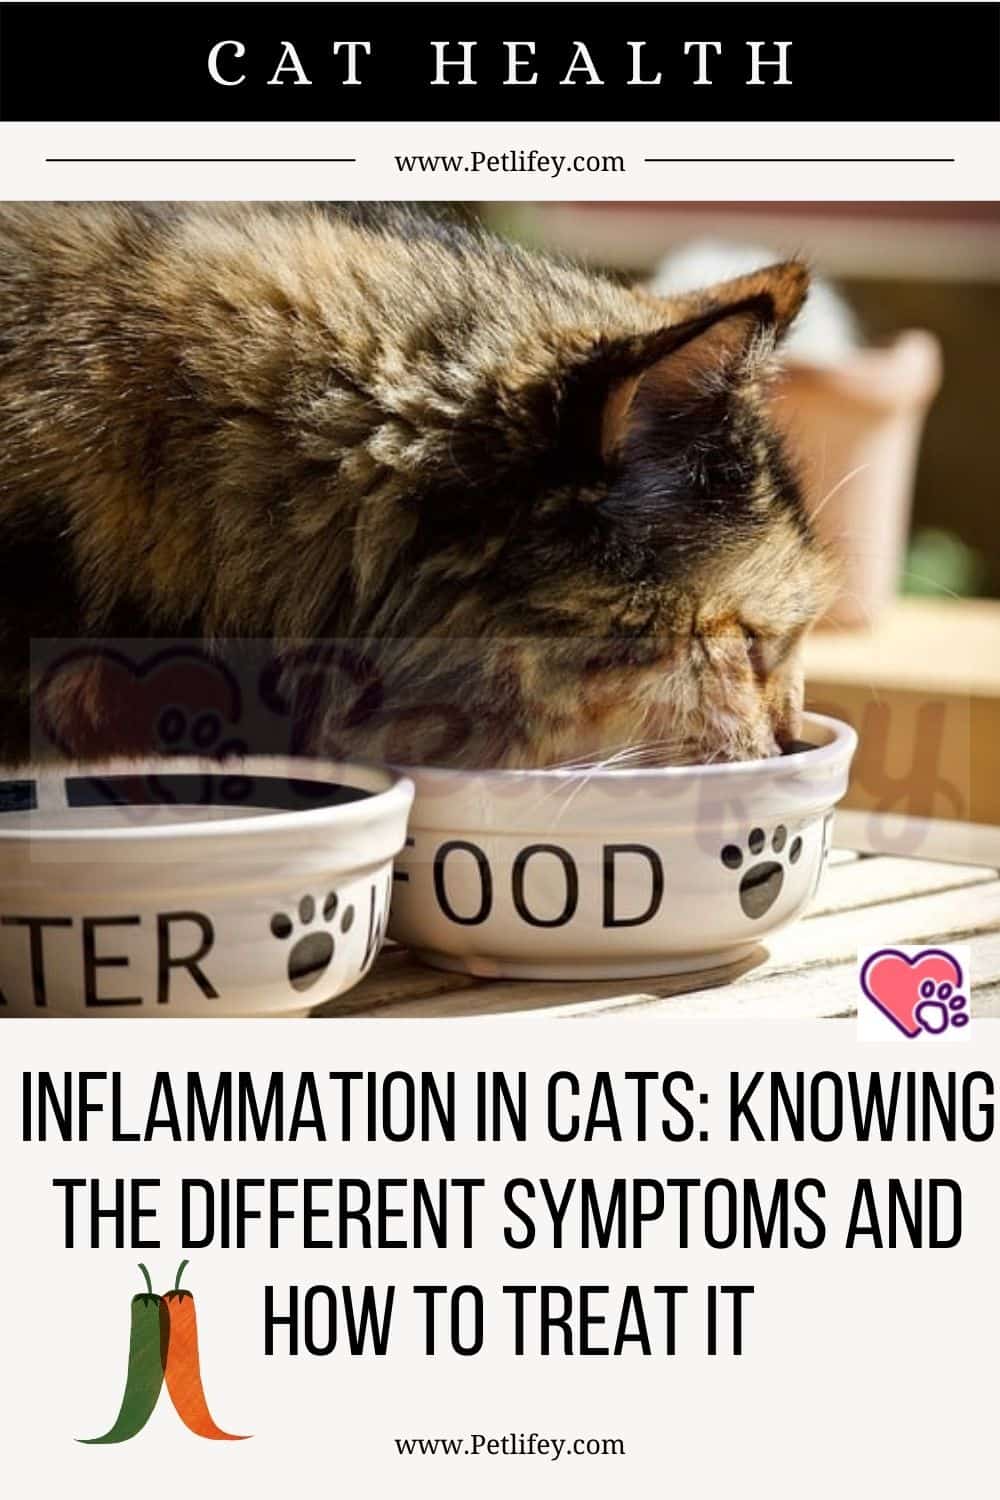 Inflammation in cats